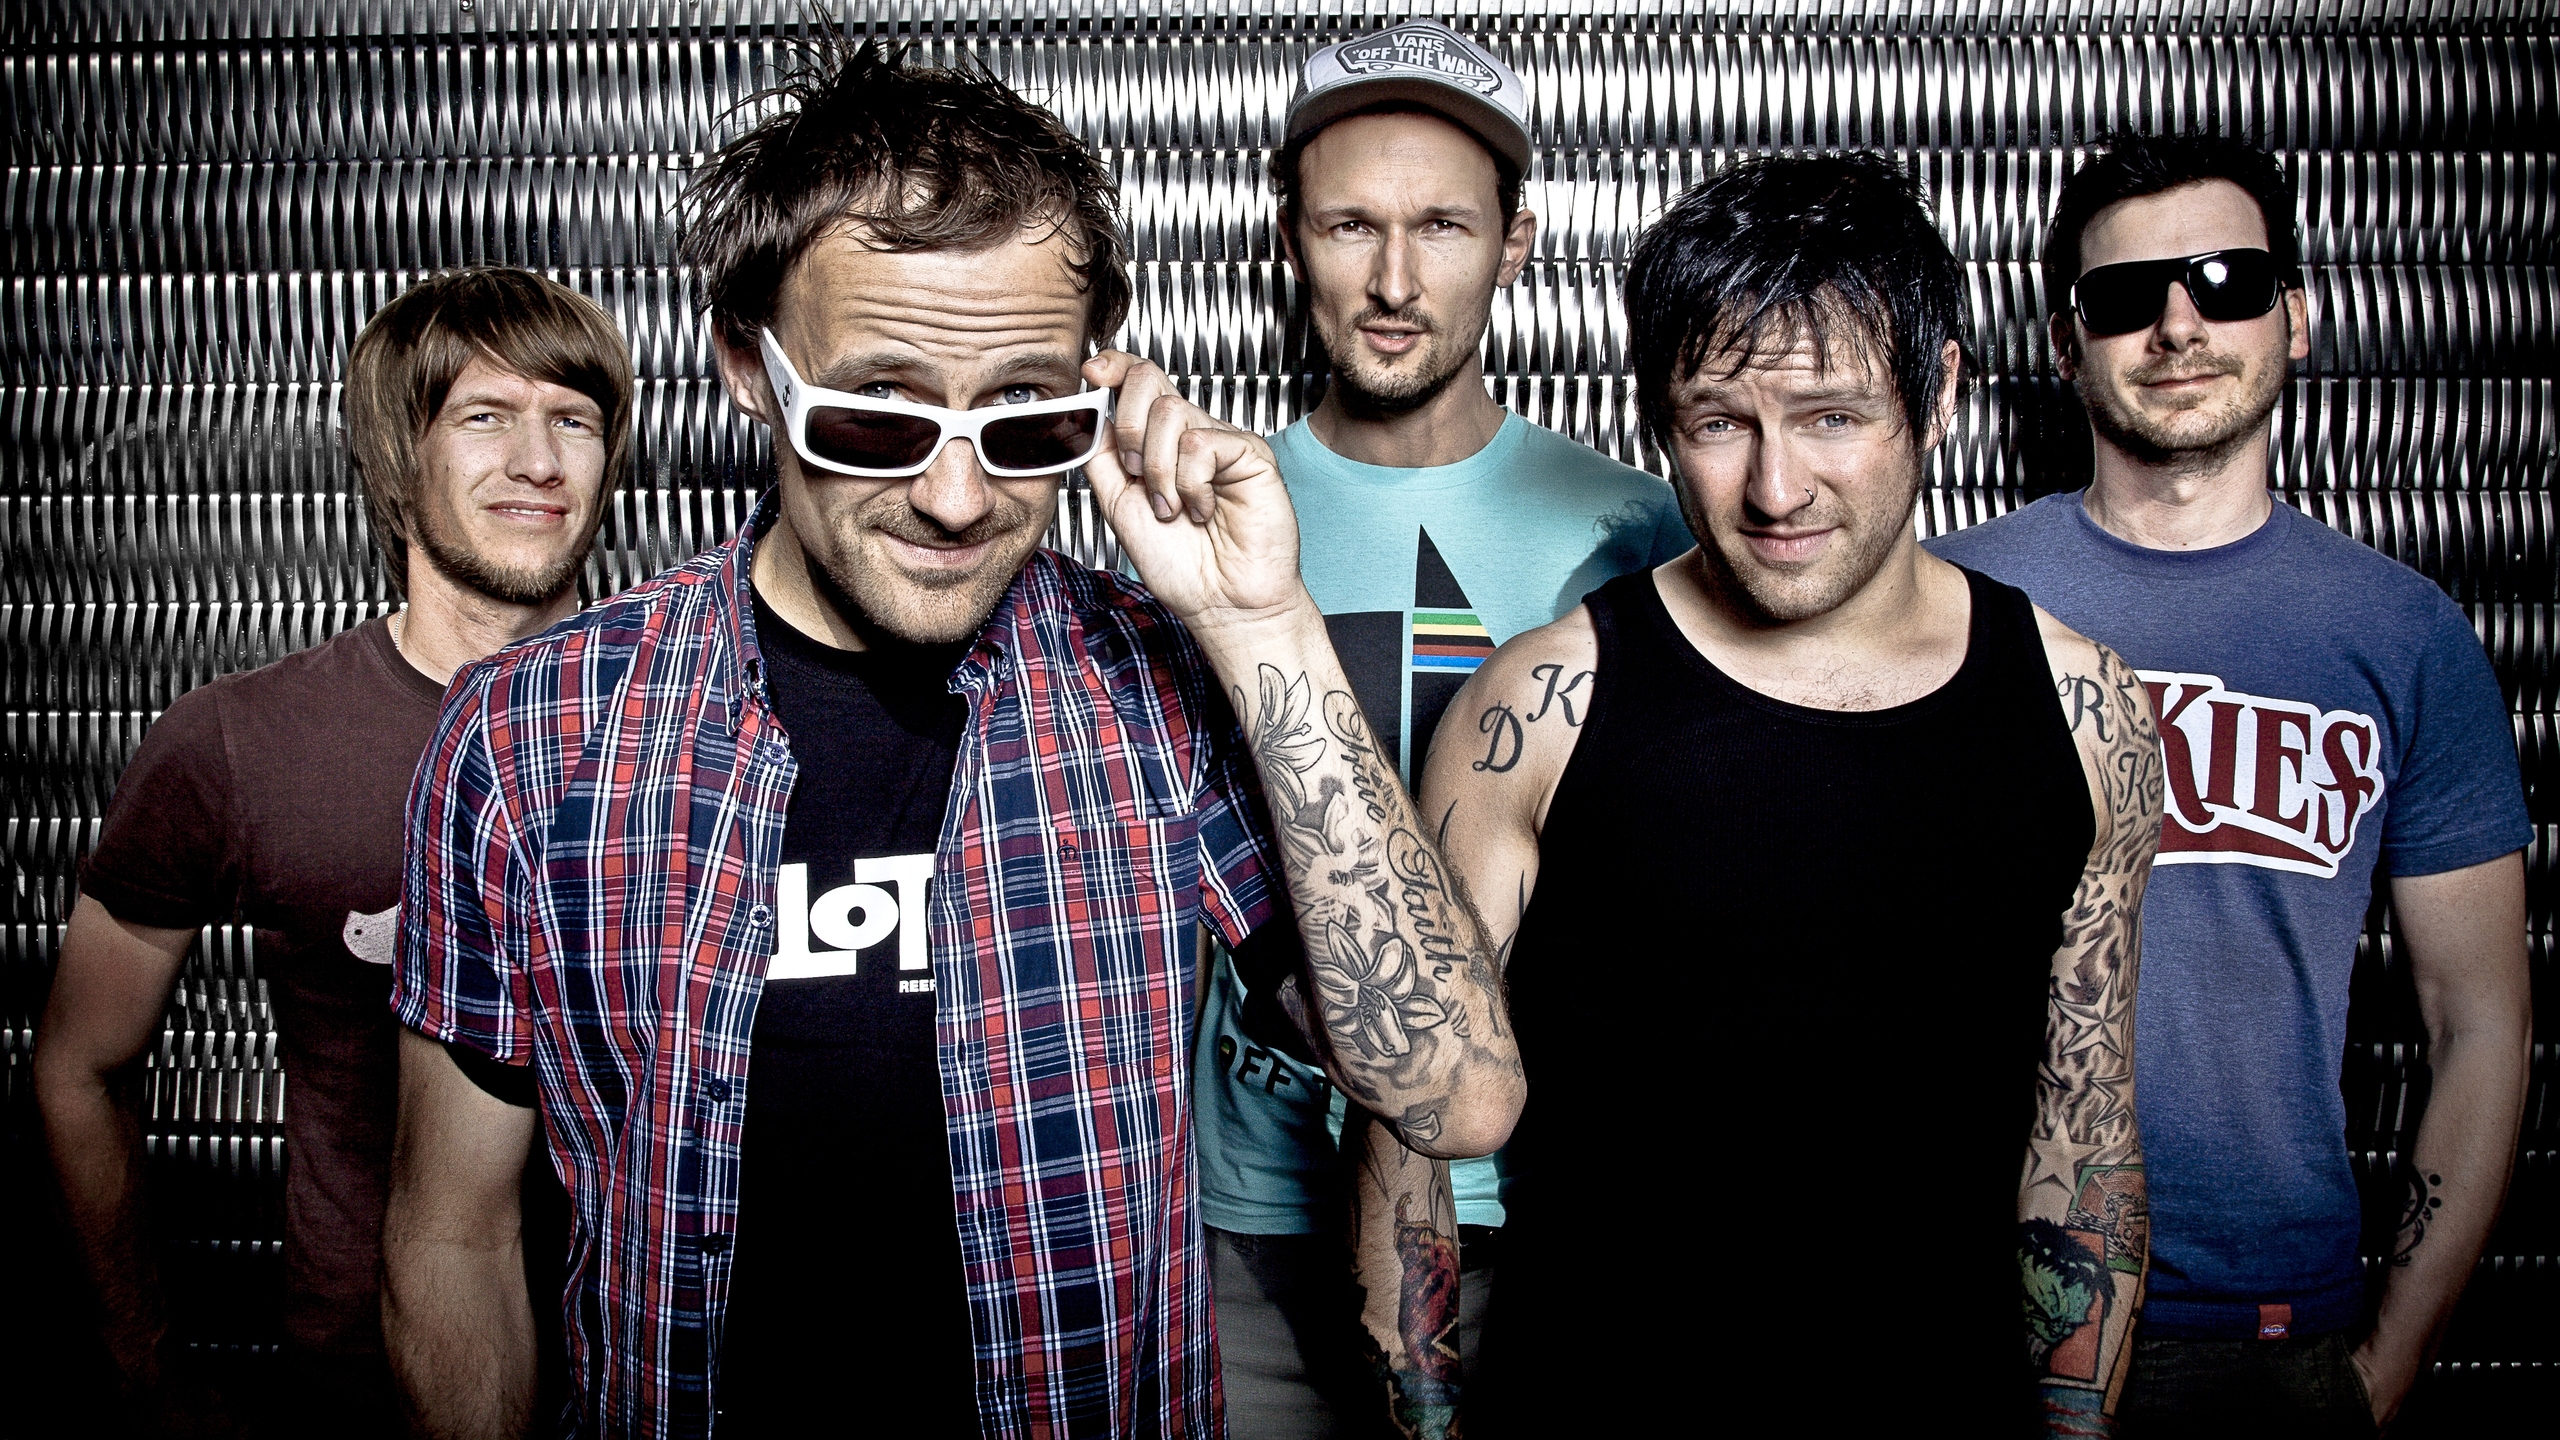 Donots for 2560x1440 HDTV resolution